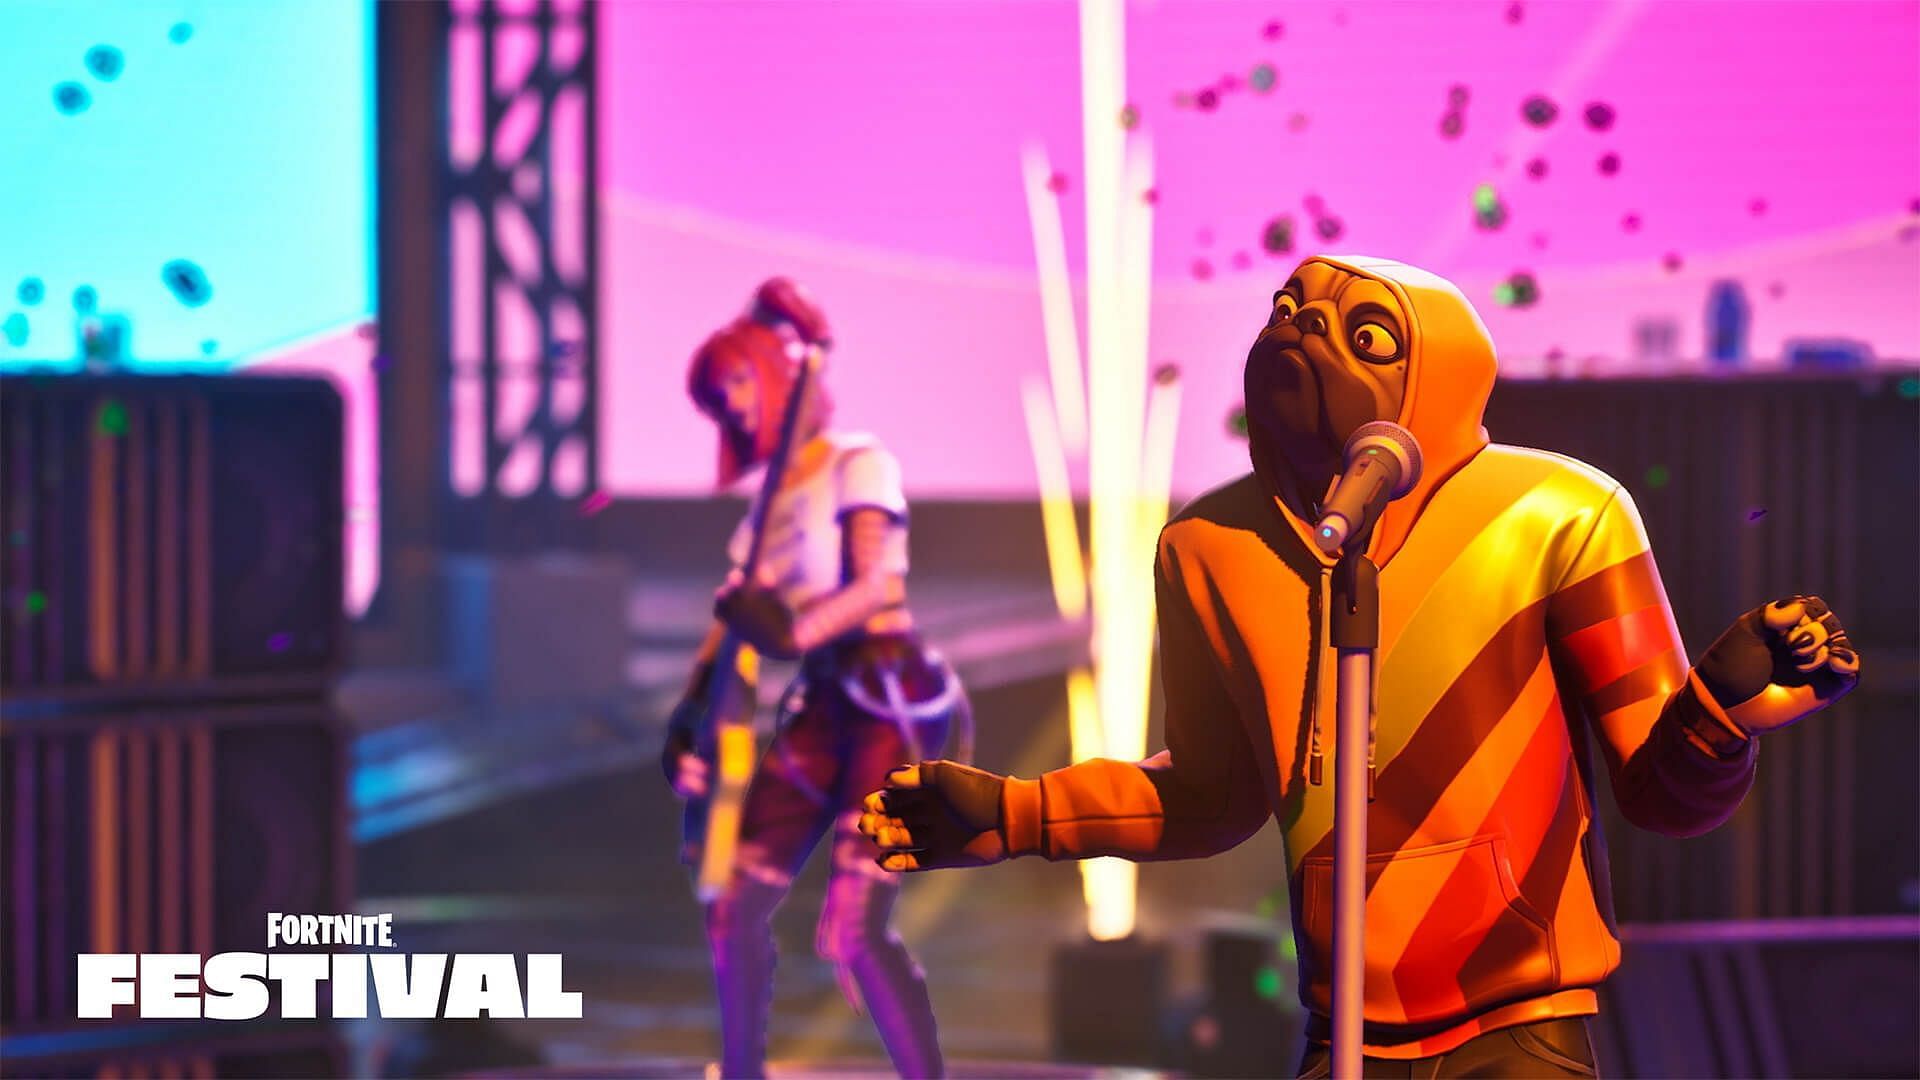 Fortnite Festival is only going to get better in time, Alex Rigopolous, founder and head of Harmonix confirms